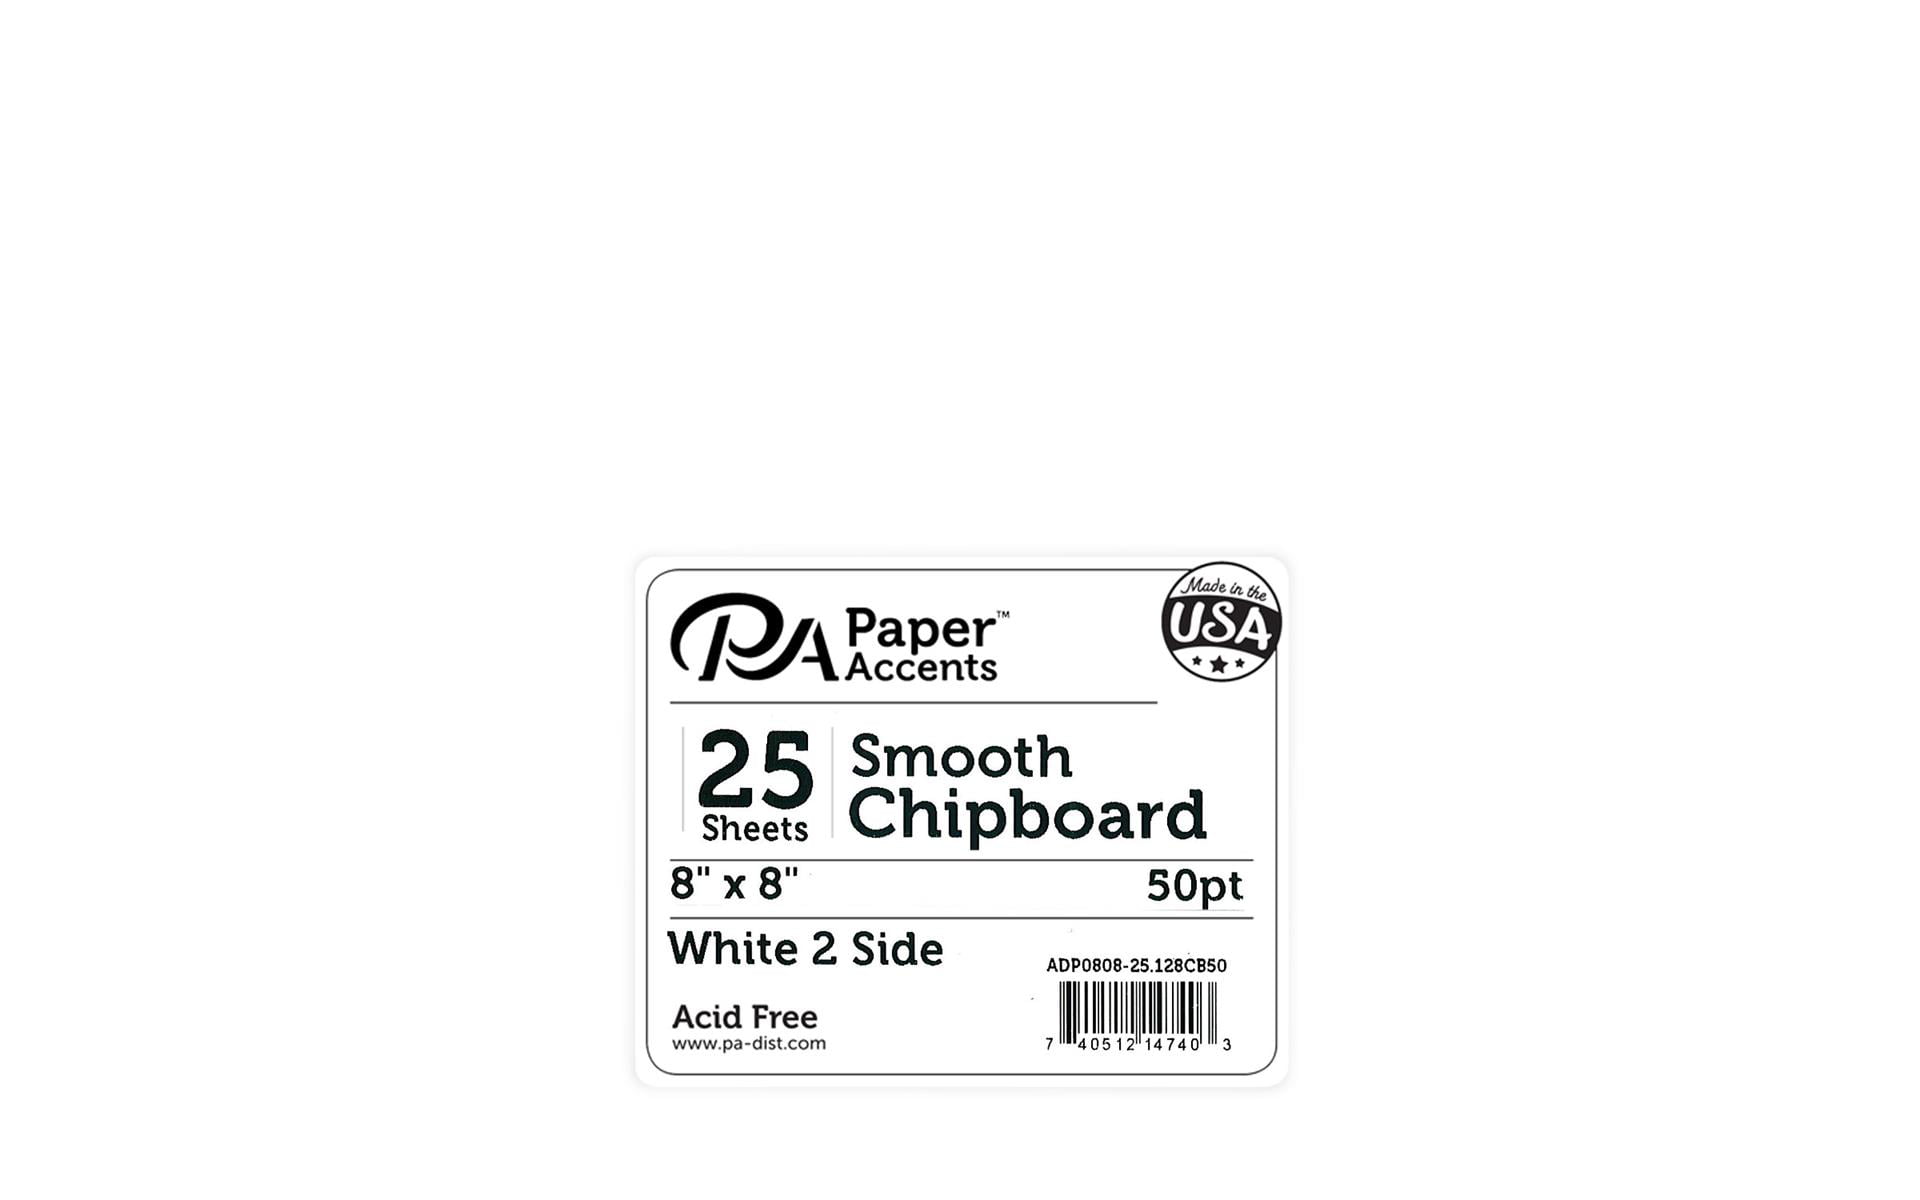 Medium Thick Weight PaperBoard .050 Point Small Square Card Size 4 X 4 1200 Sheets Chipboard 50pt White 1 Side Caliper White Coated on One Side Cardboard Paper 4X4 Inches 